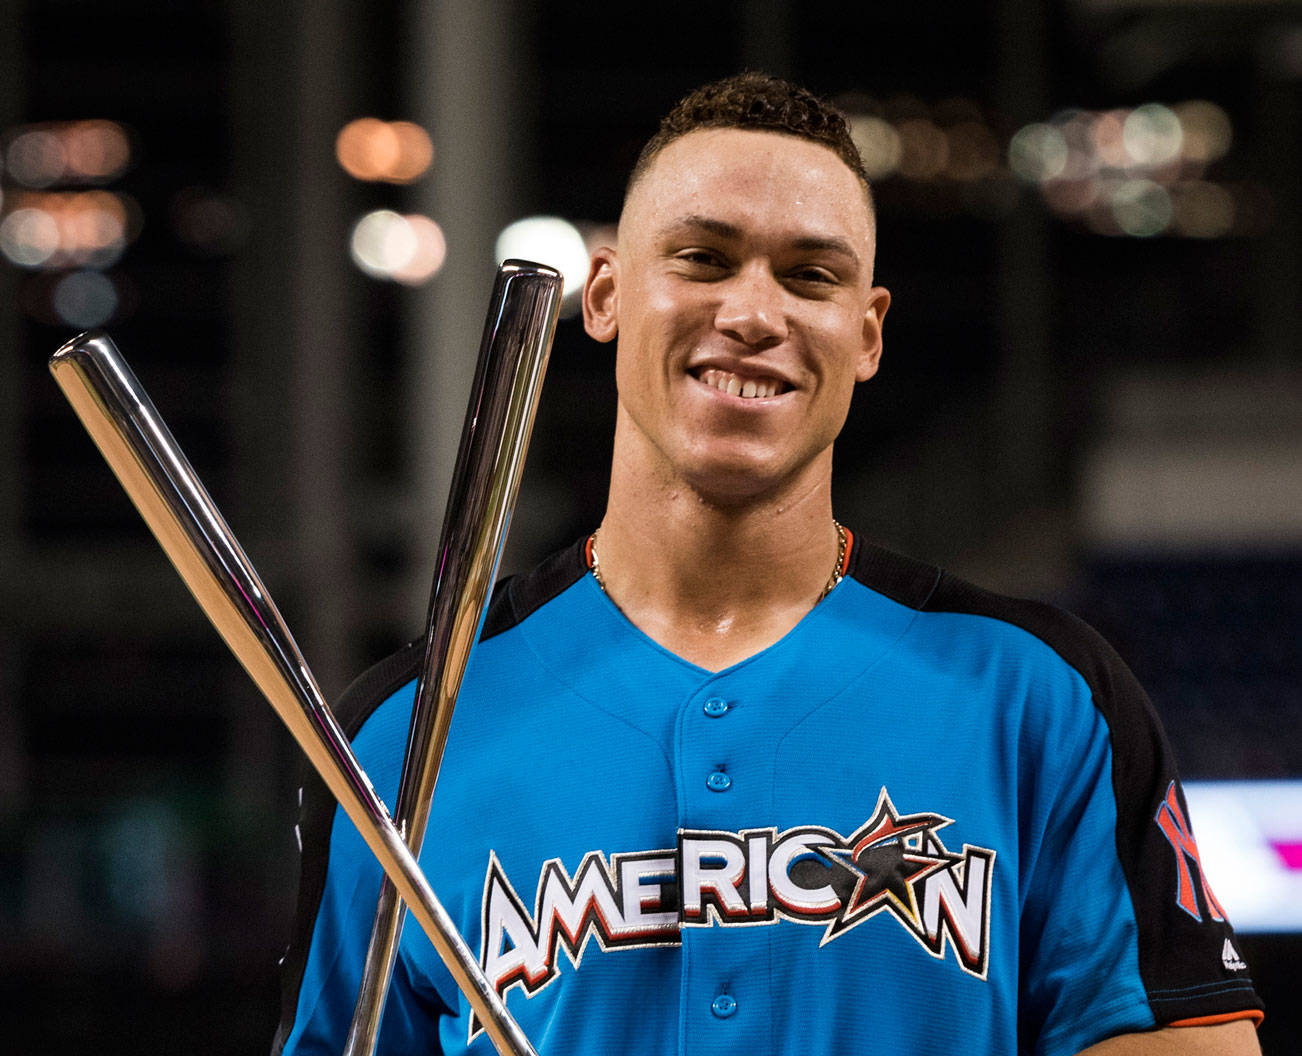 Judge powers way to Home Run Derby crown after Stanton falls in first round